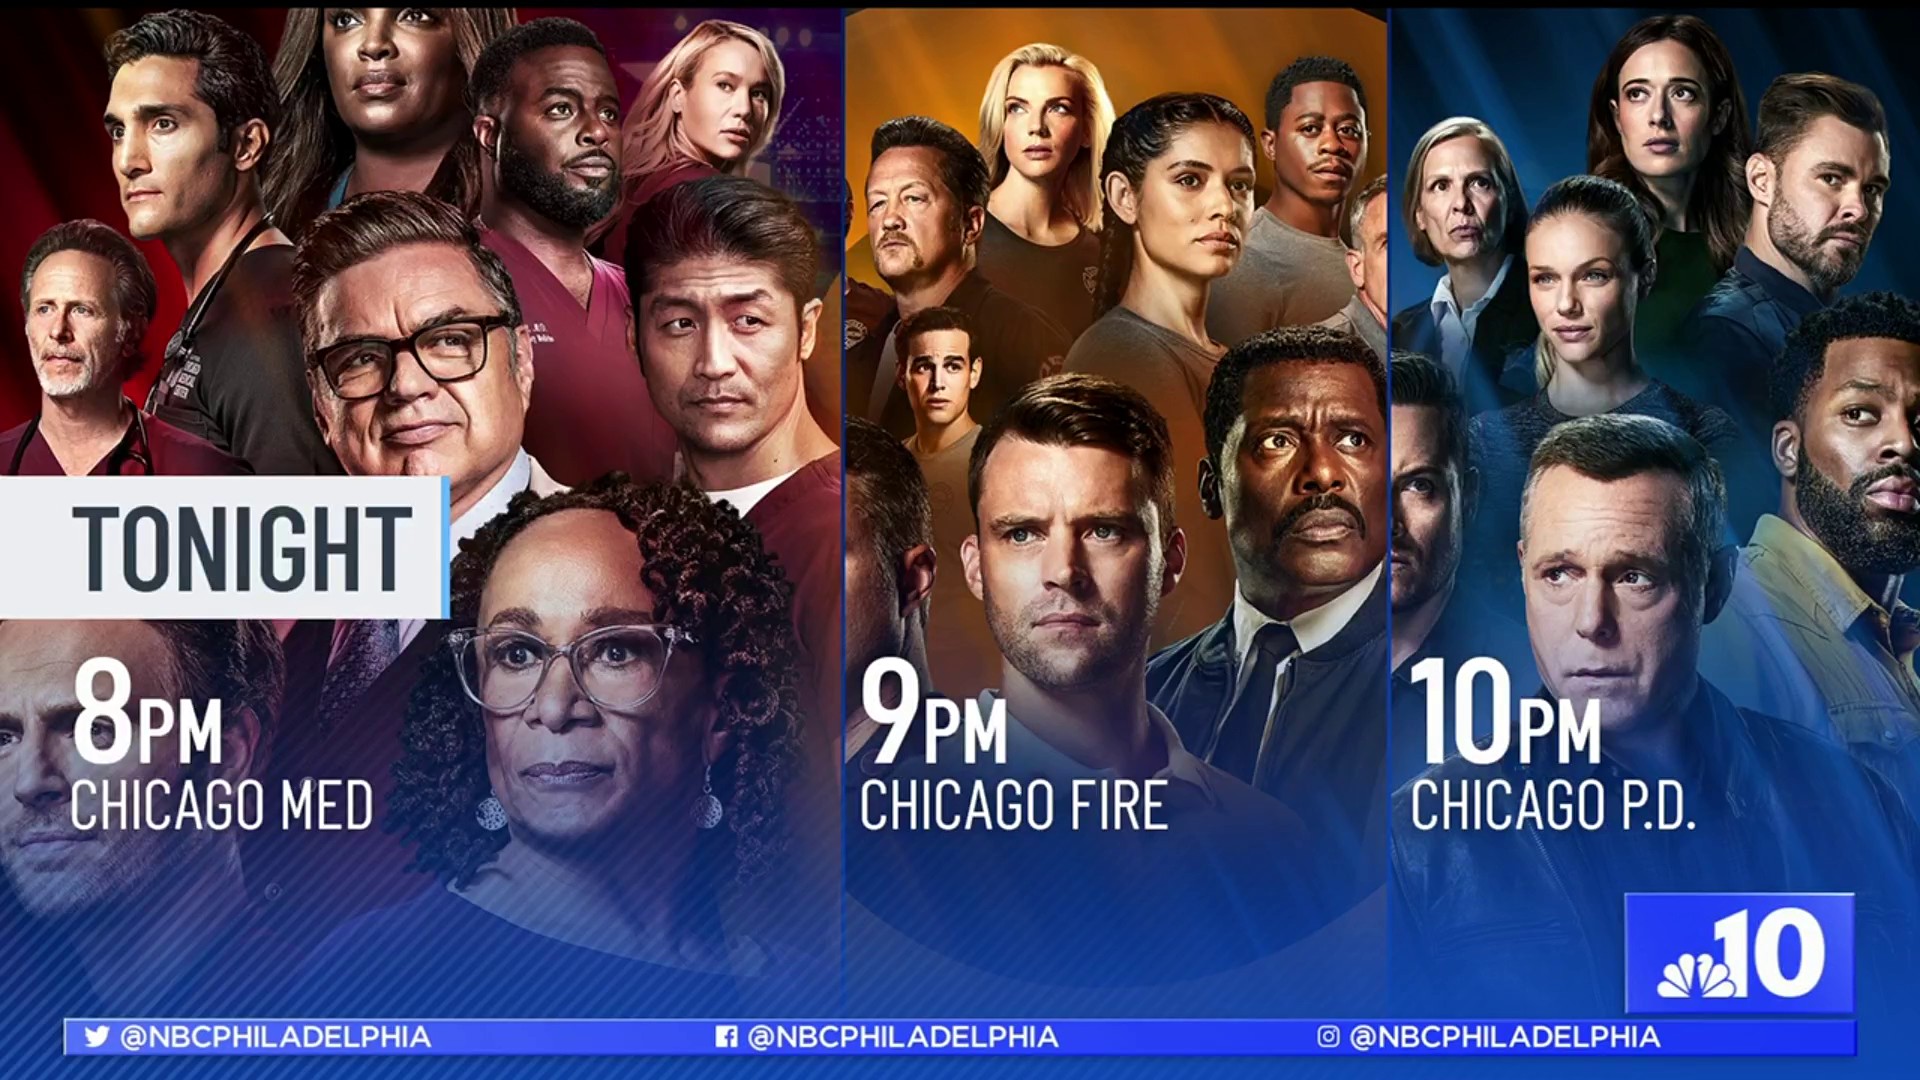 ‘Chicago' Wednesday Is Back on NBC10